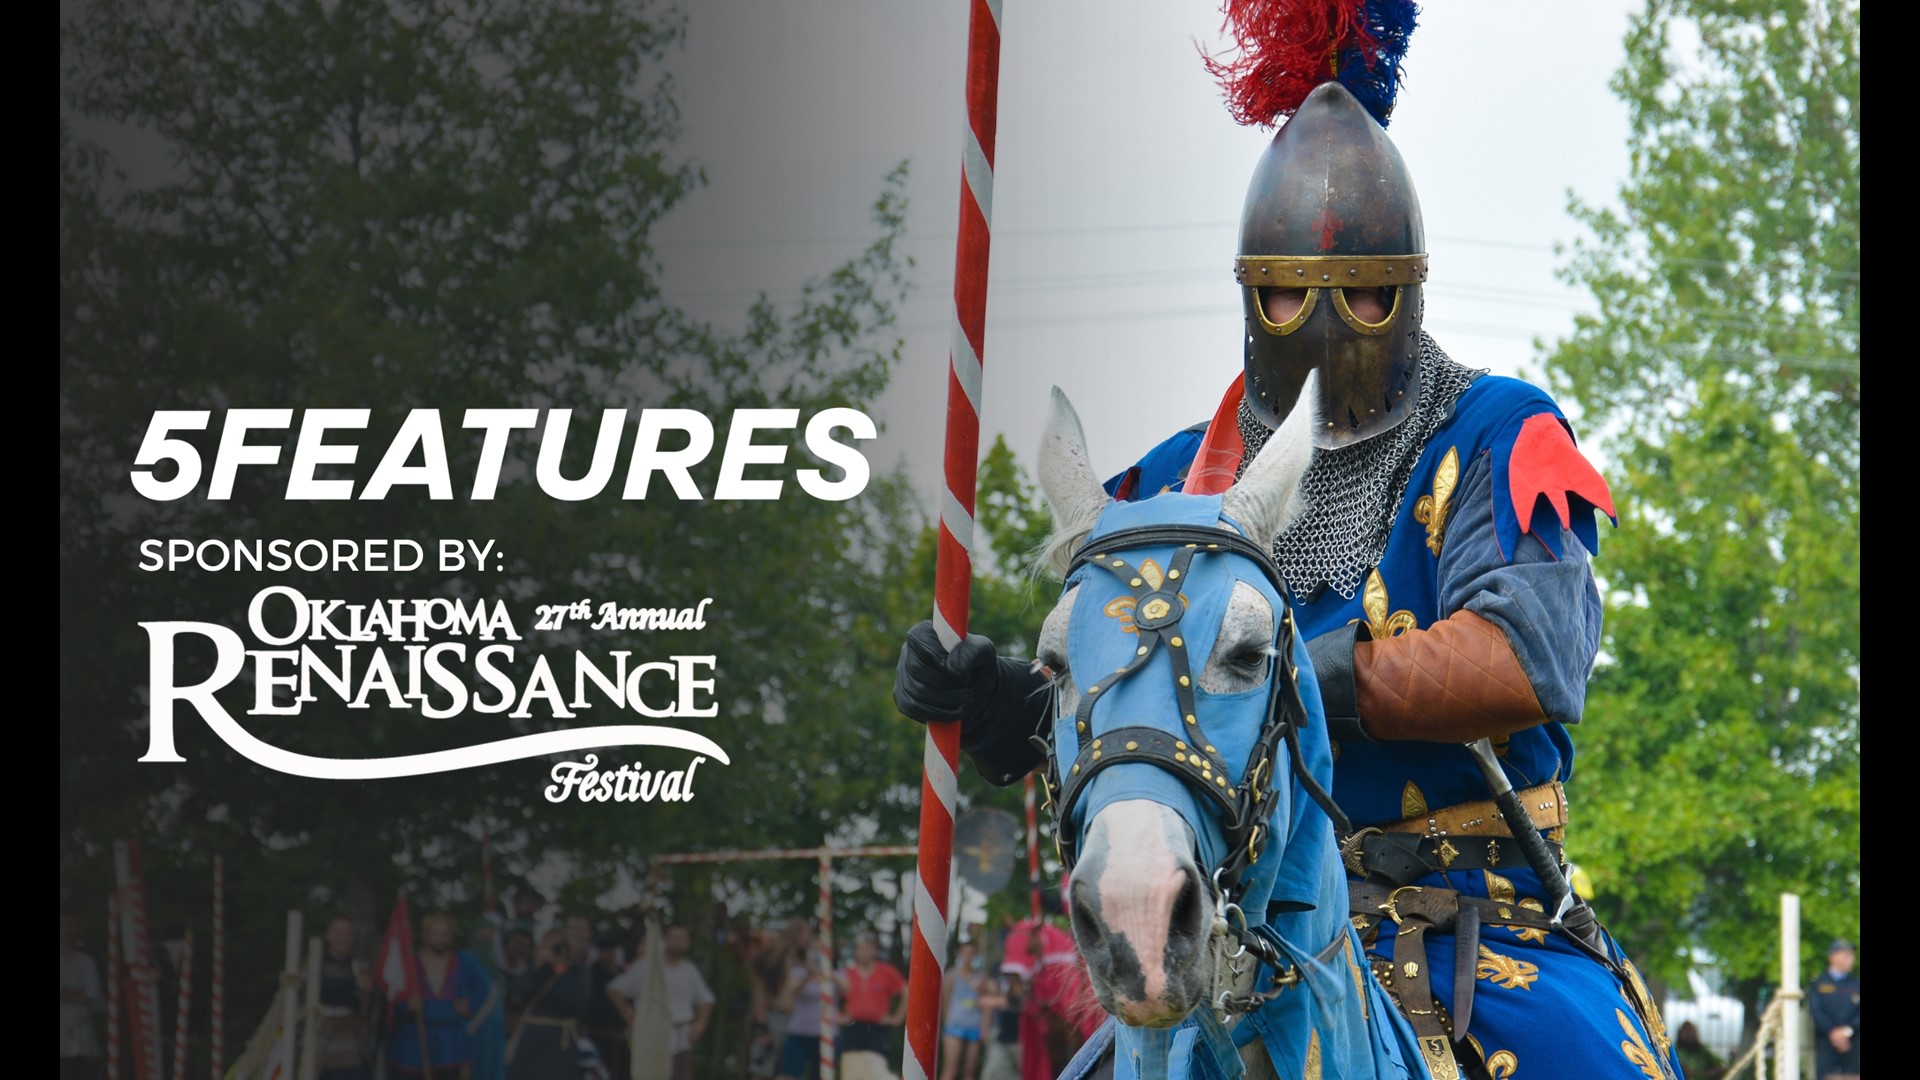 Step back into 1569 England to experience the royal quest for knighthood, a full-contact Jousting Tournament, Birds of Prey exhibitions, and traveling Acrobats!